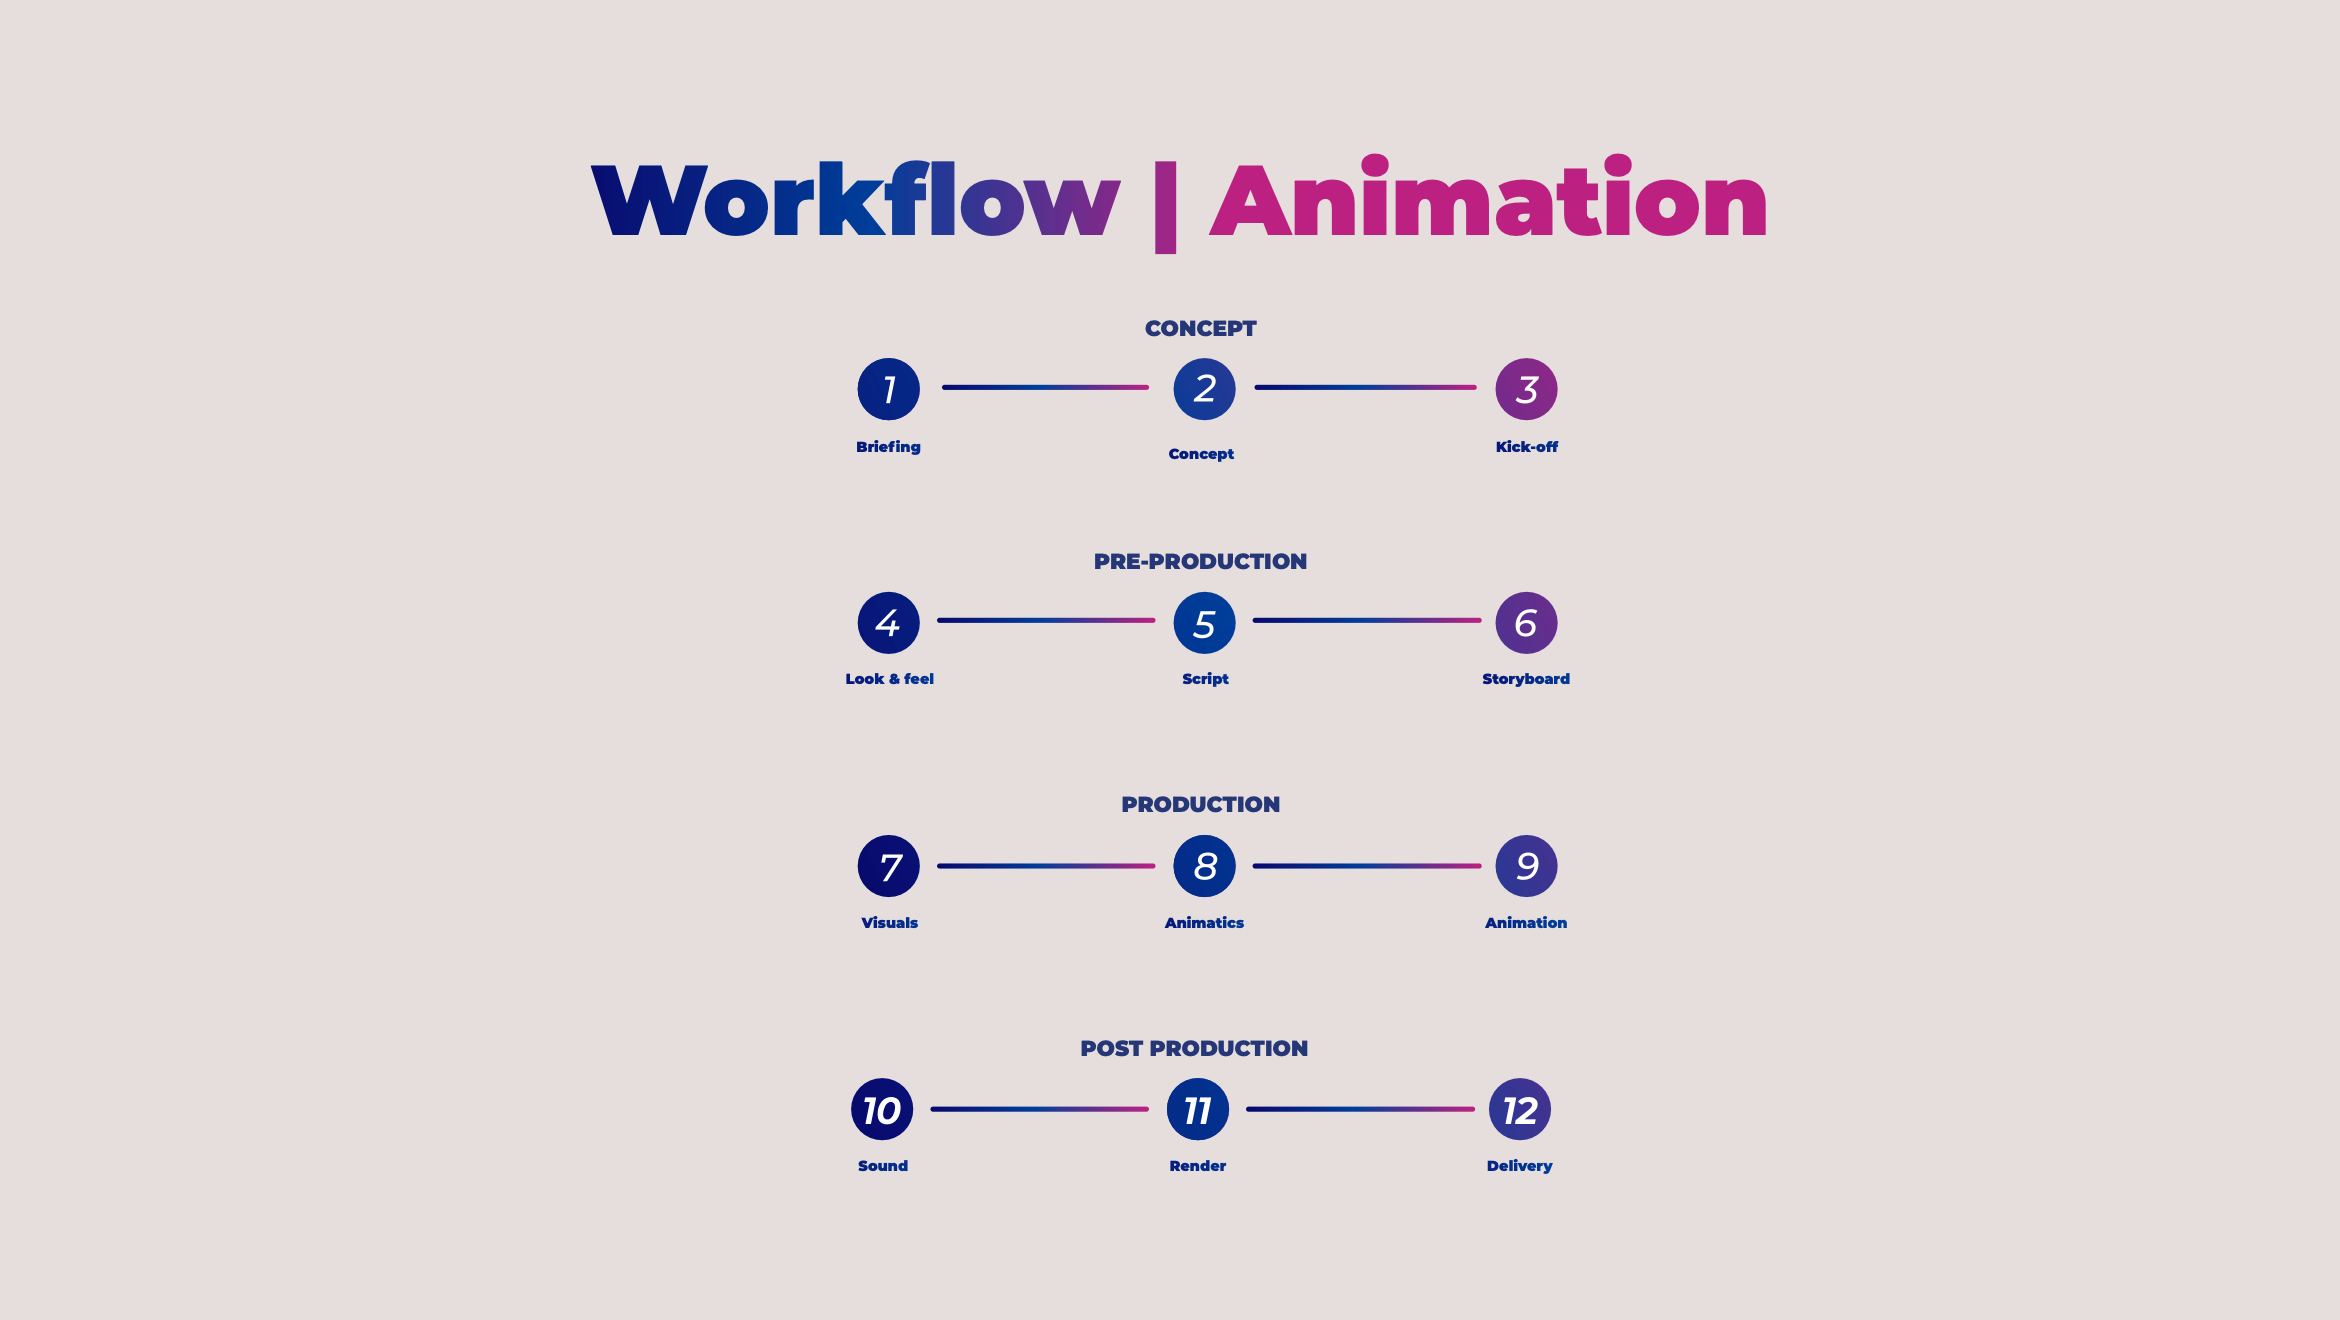 Overview of Sensu's animation workflow